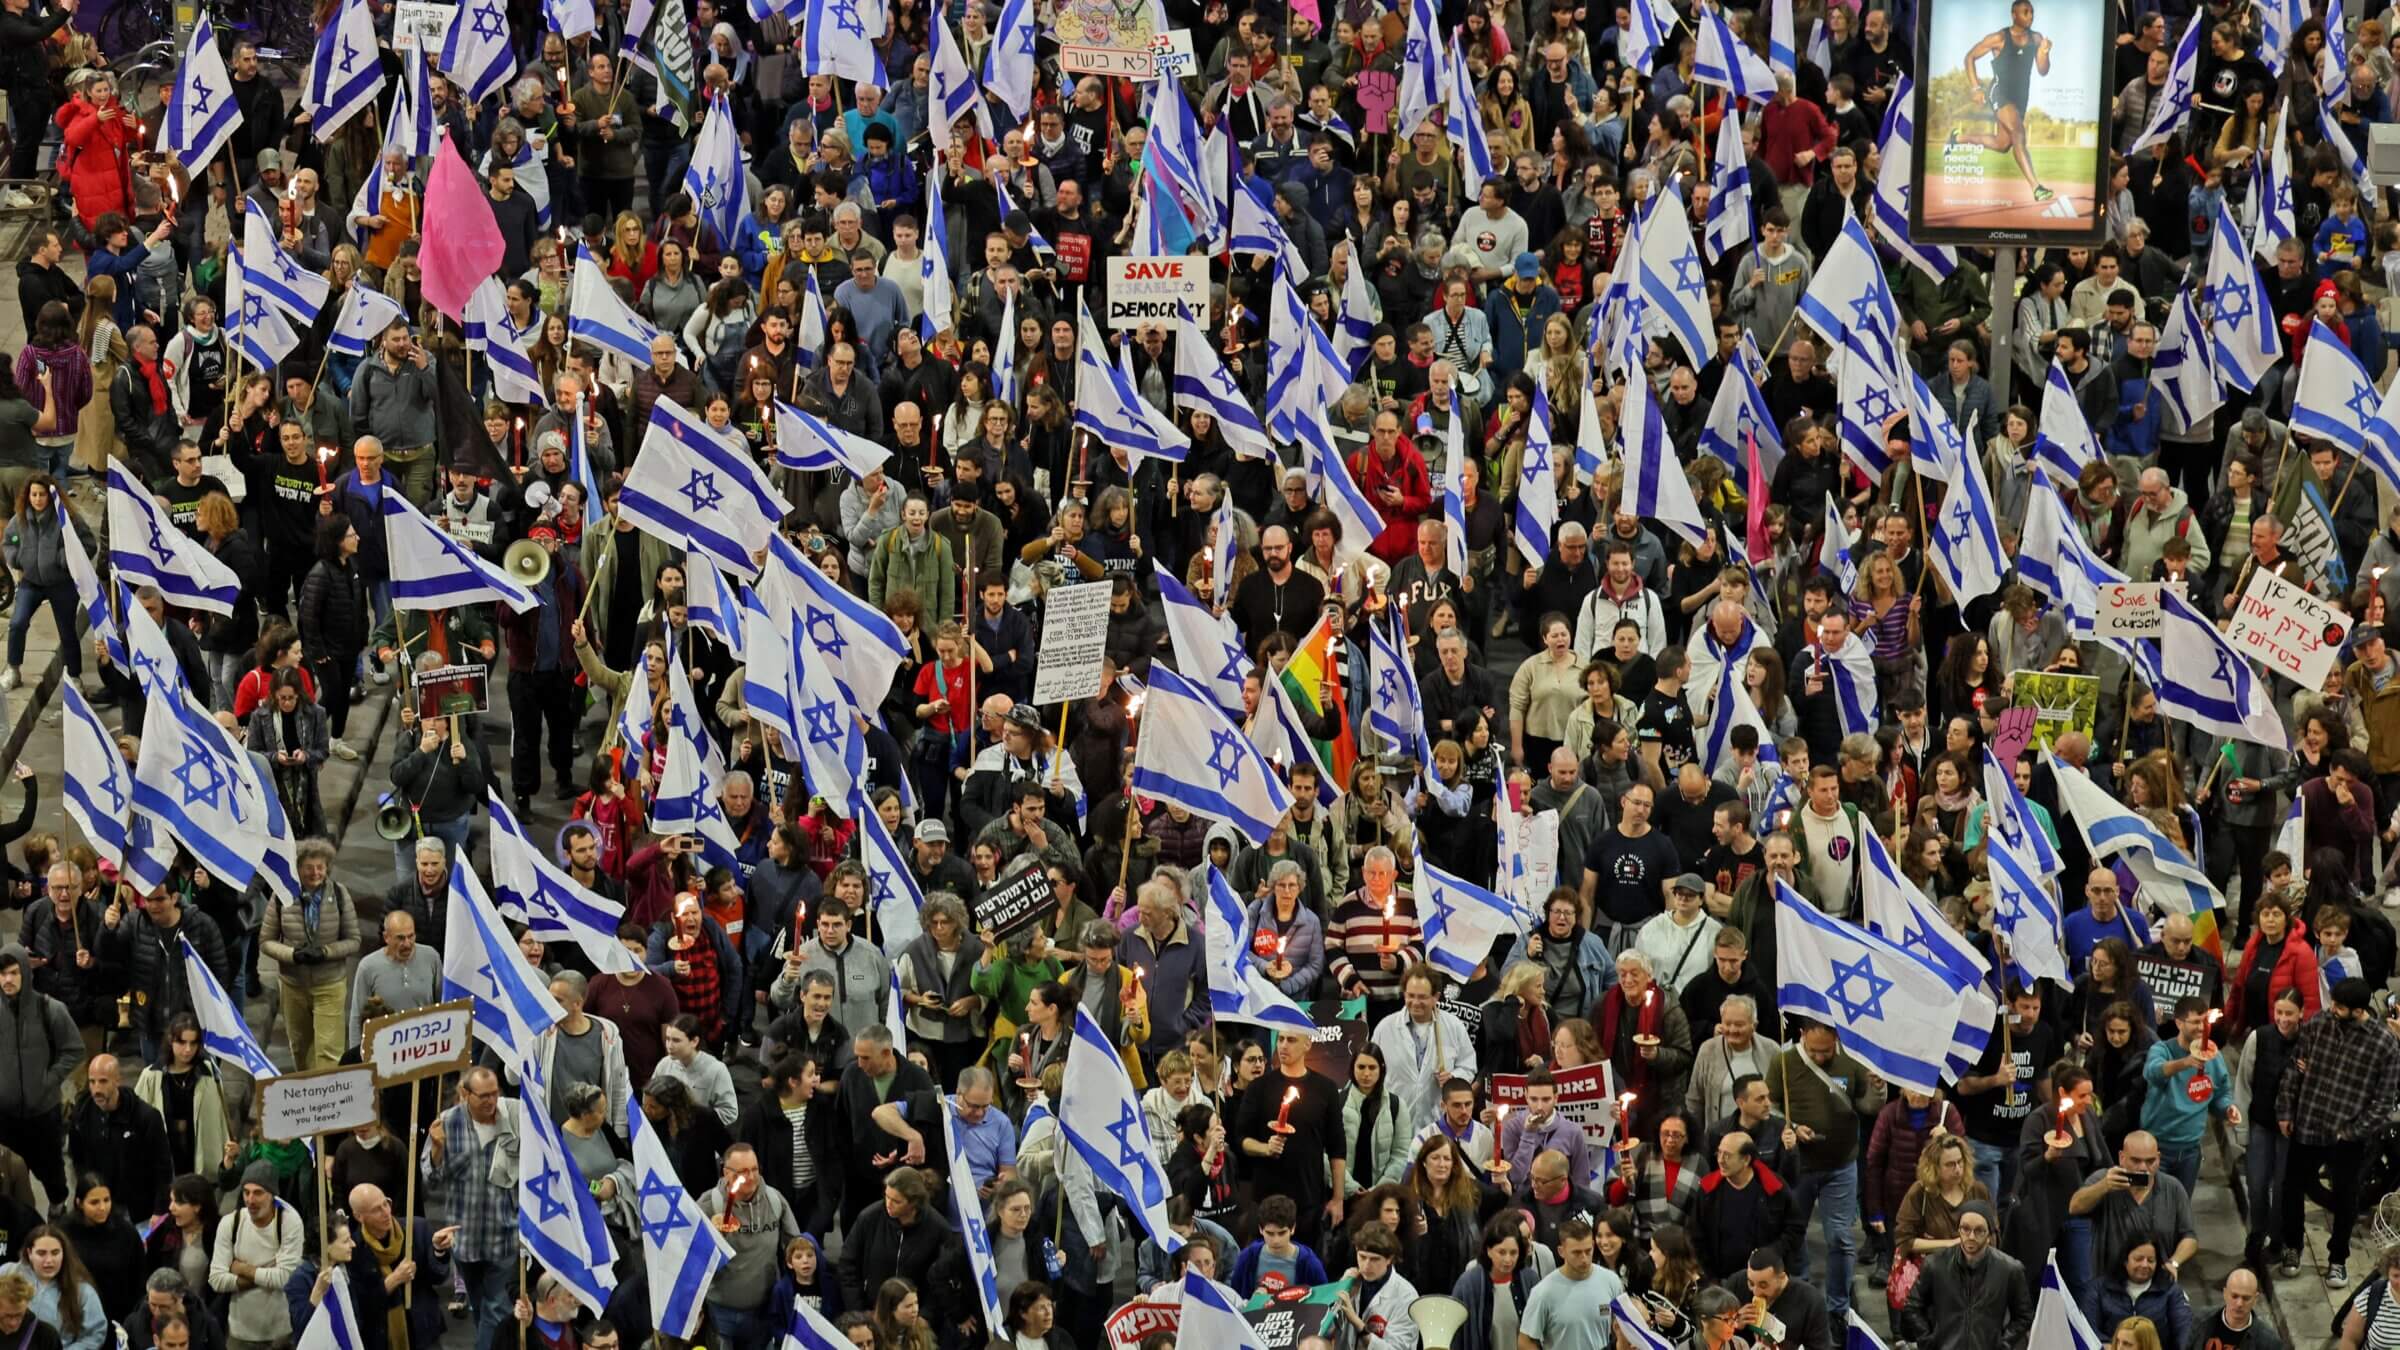 Hundreds of thousands of Israelis, like those gathered above in Tel Aviv, have turned out across the country to protest changes to Israel's supreme court. While many American Jewish leaders have spoken out against the legal reforms, organizers have had trouble mustering large crowds to protest in the United States.